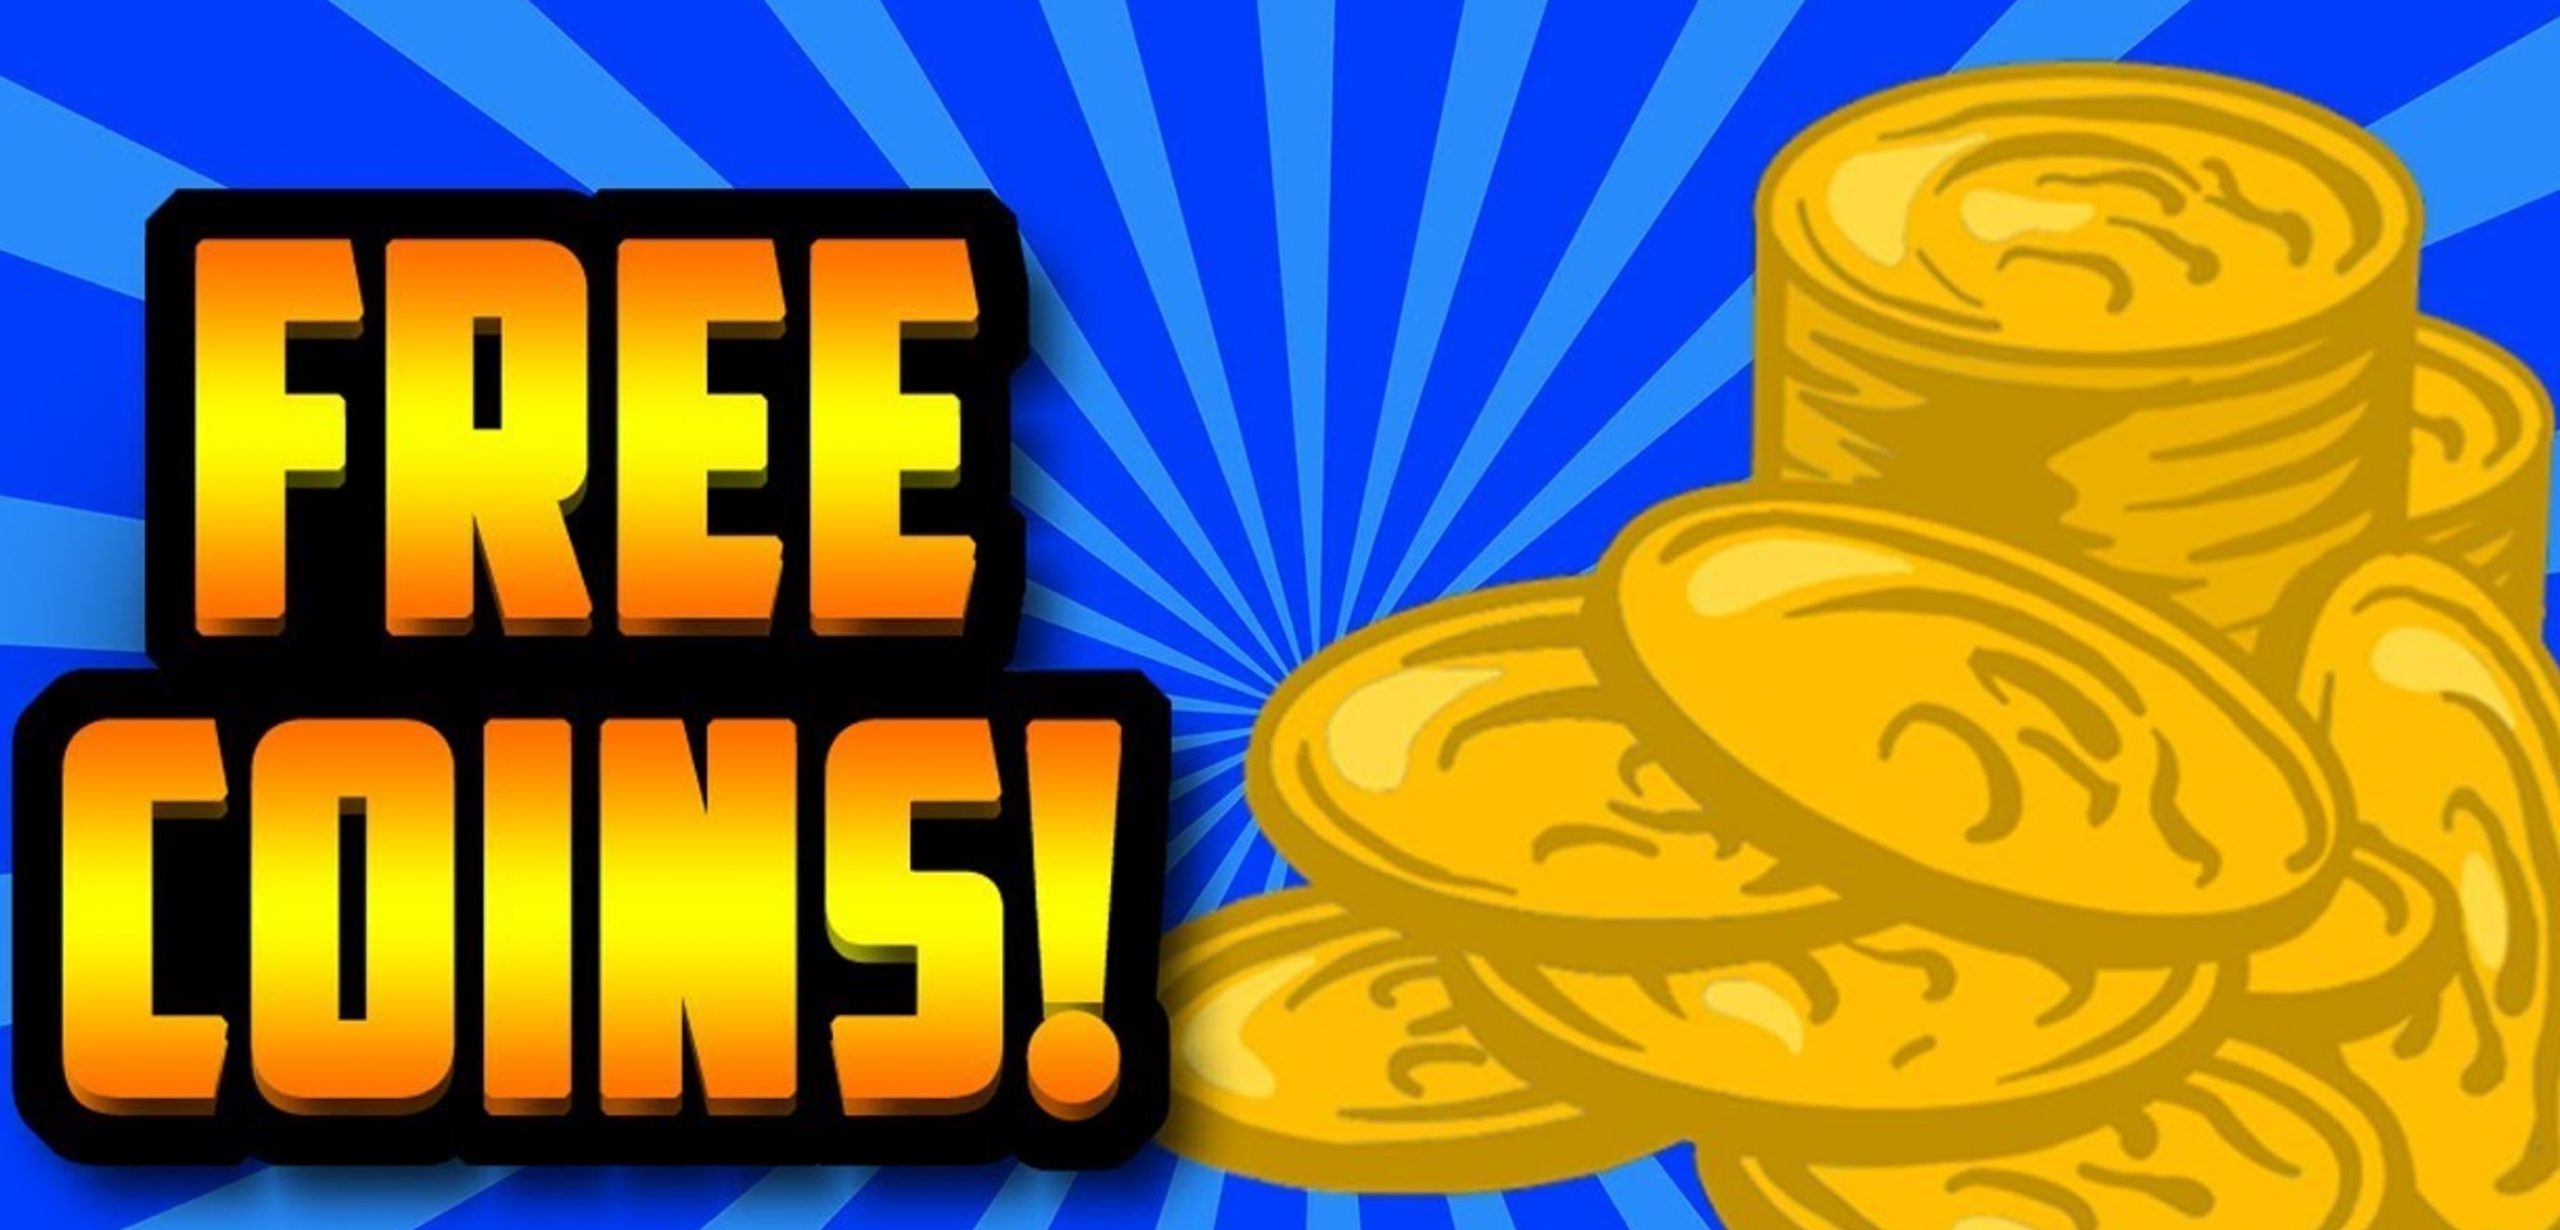 Free Coins And Gift Cards Are Great Ways To Get Started In Gambling